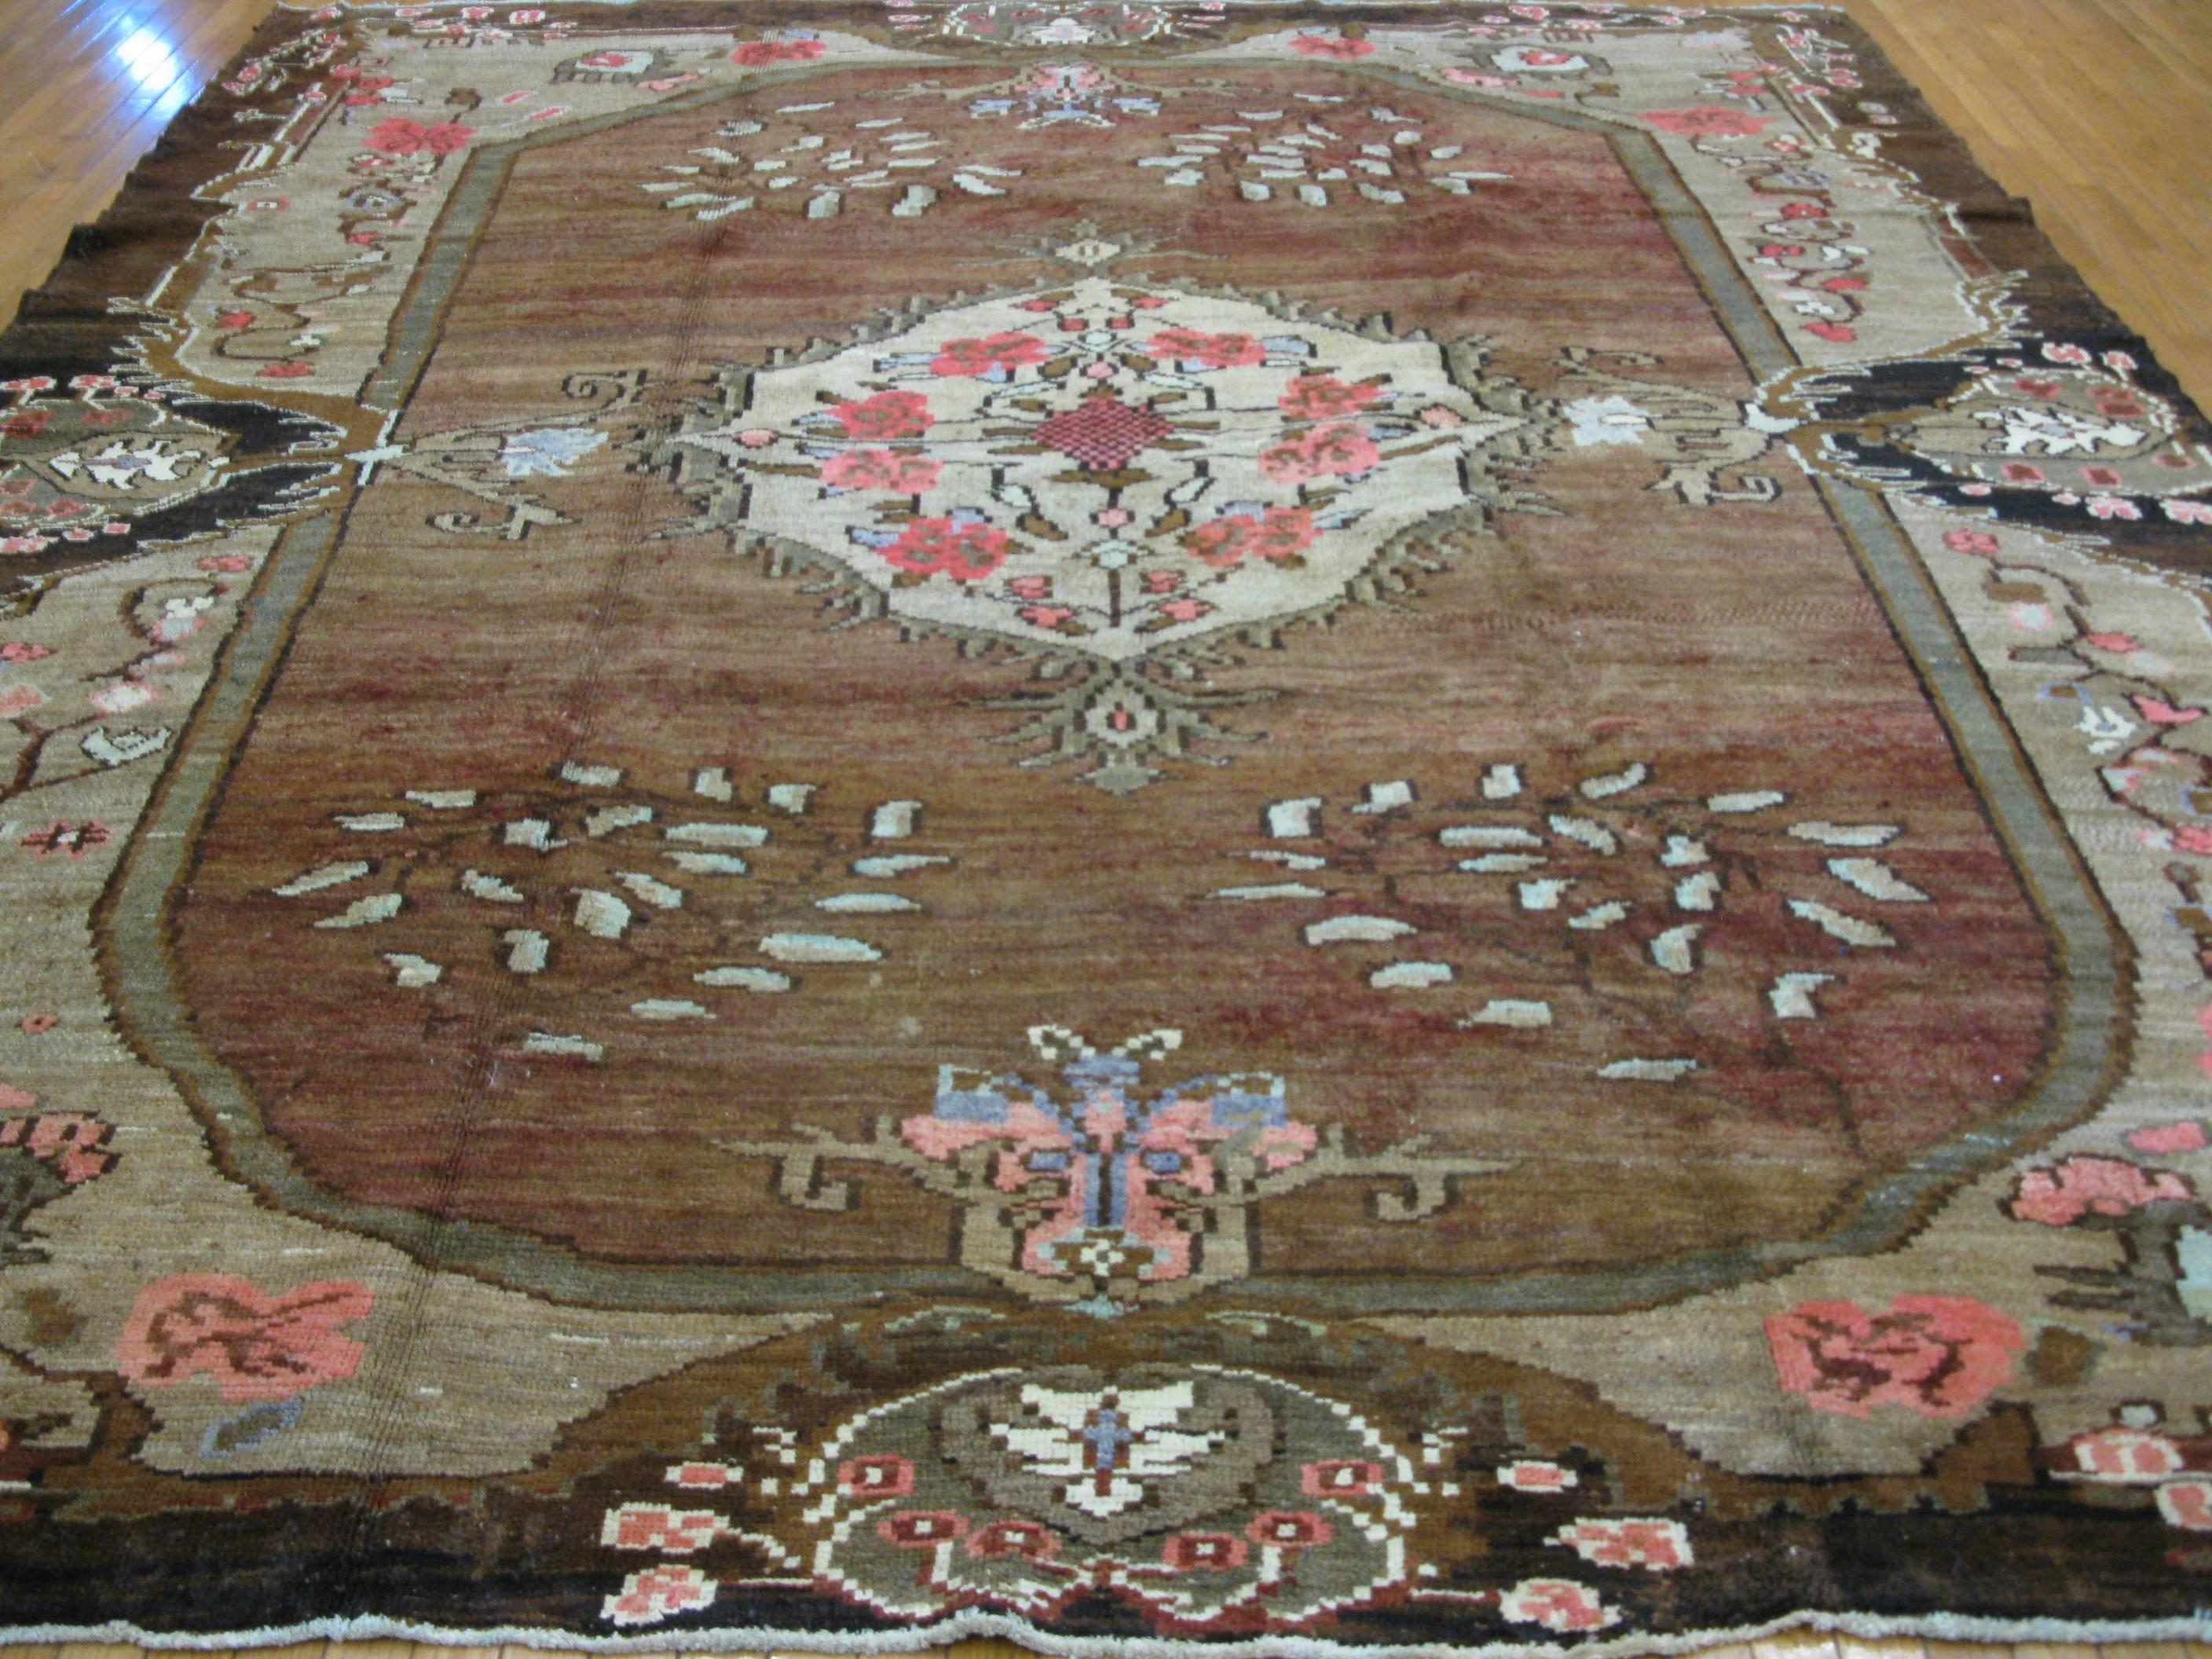 This is a very unique hand-knotted Turkish rug with a country French style design. It measures 9' 6'' x 11' made of wool pile and cotton foundation with all natural dyes in primary colors.